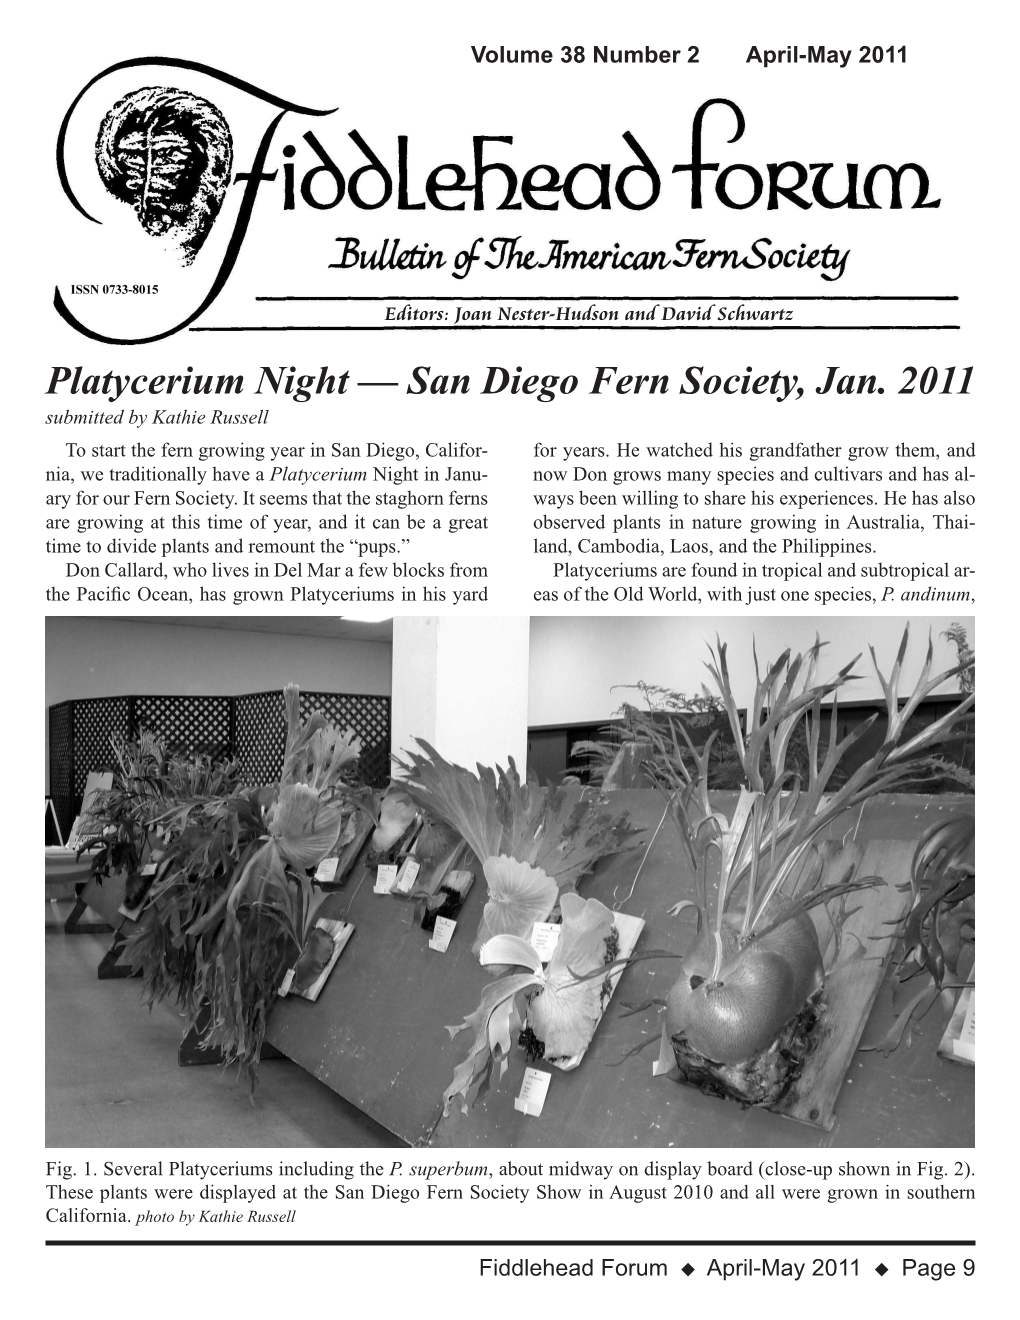 Platycerium Night — San Diego Fern Society, Jan. 2011 Submitted by Kathie Russell to Start the Fern Growing Year in San Diego, Califor- for Years